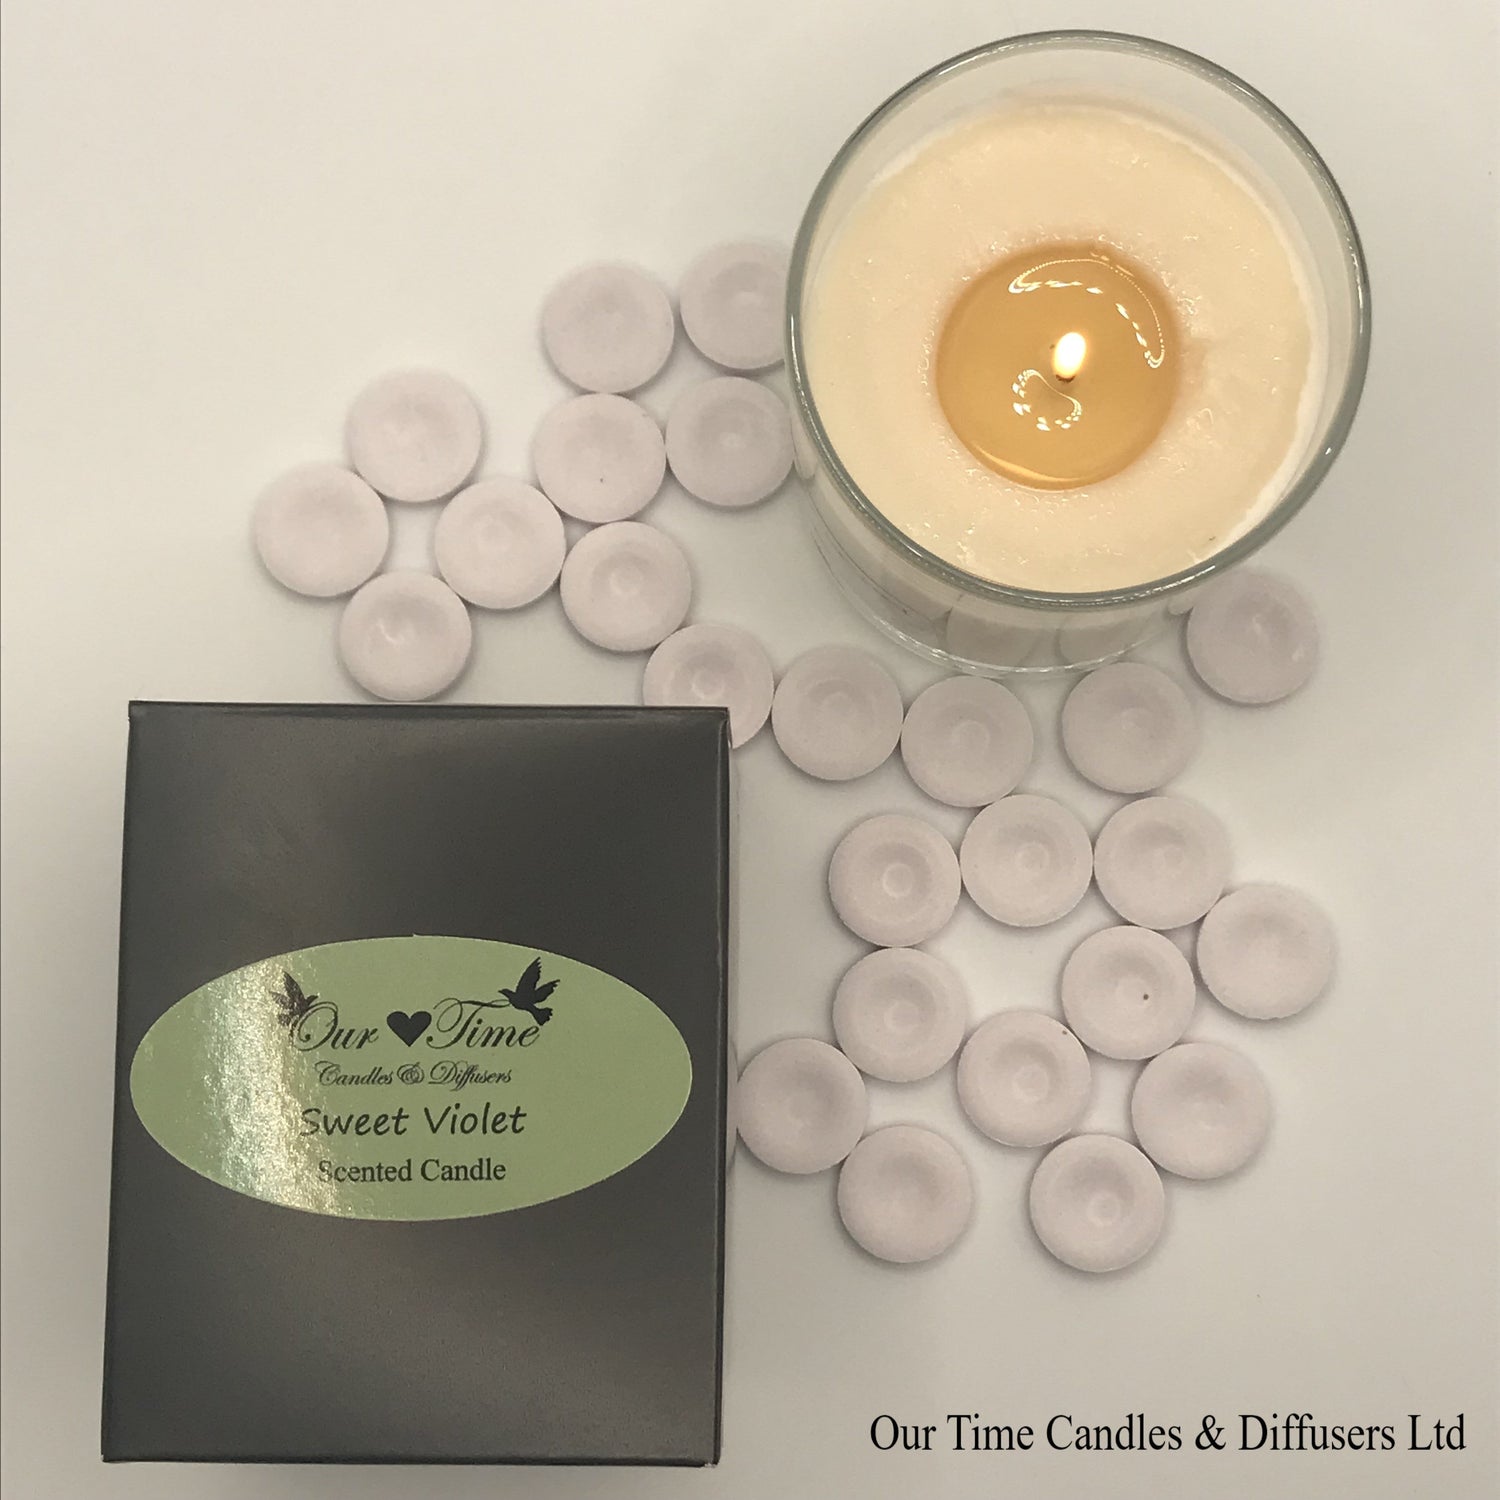 Sweet Violet - Our Time Candles and Diffusers